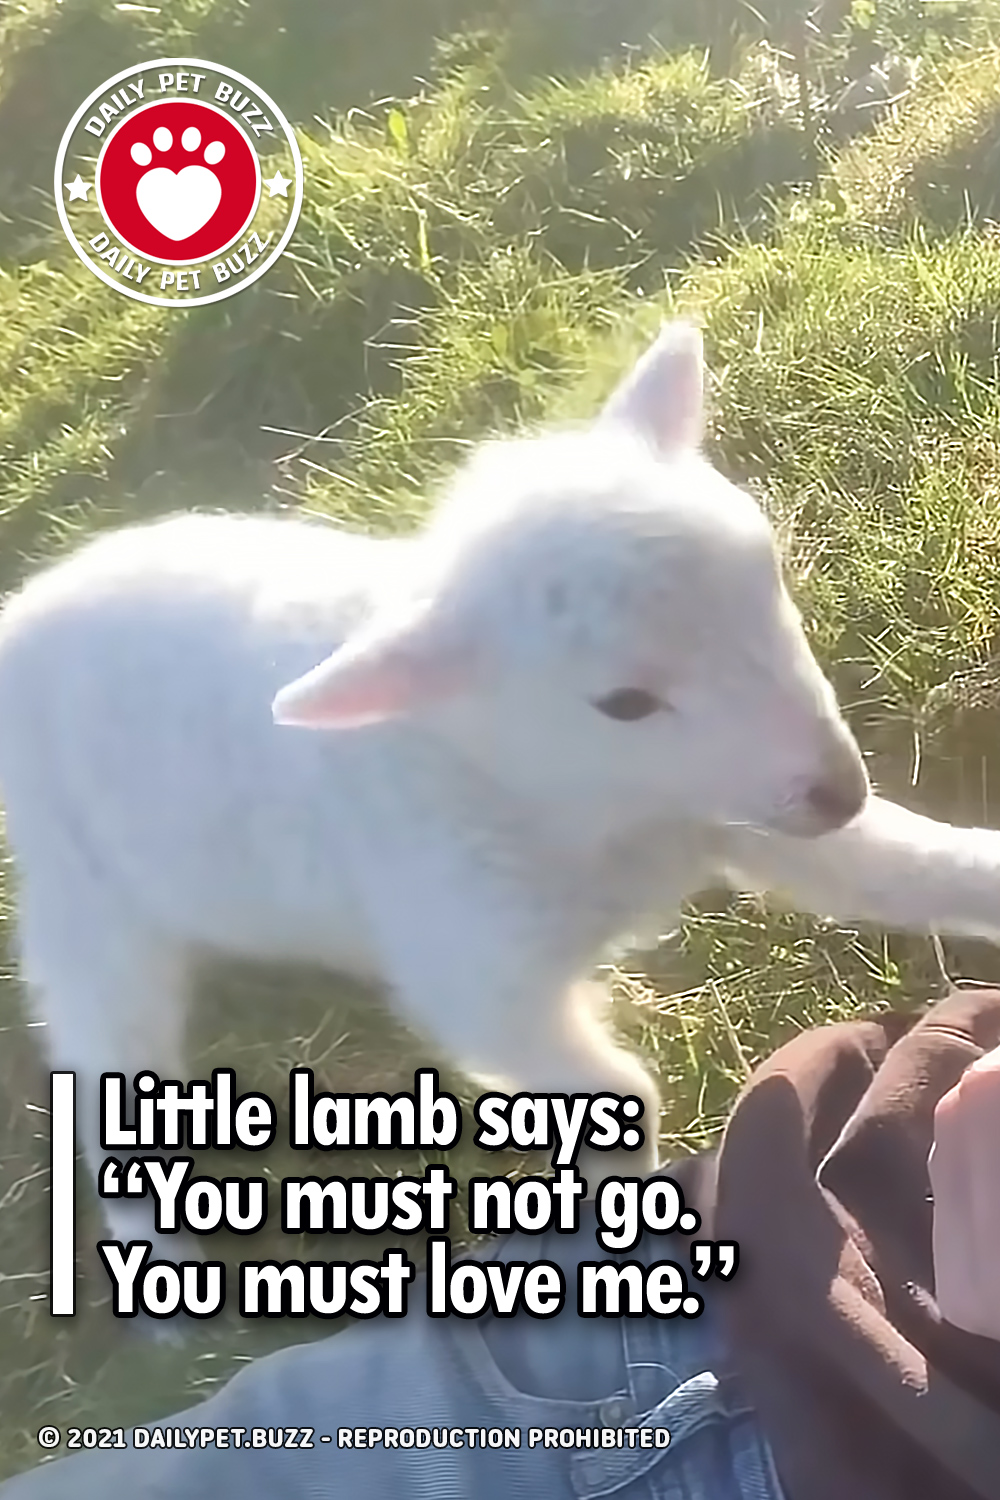 Little lamb says: “You must not go. You must love me.”